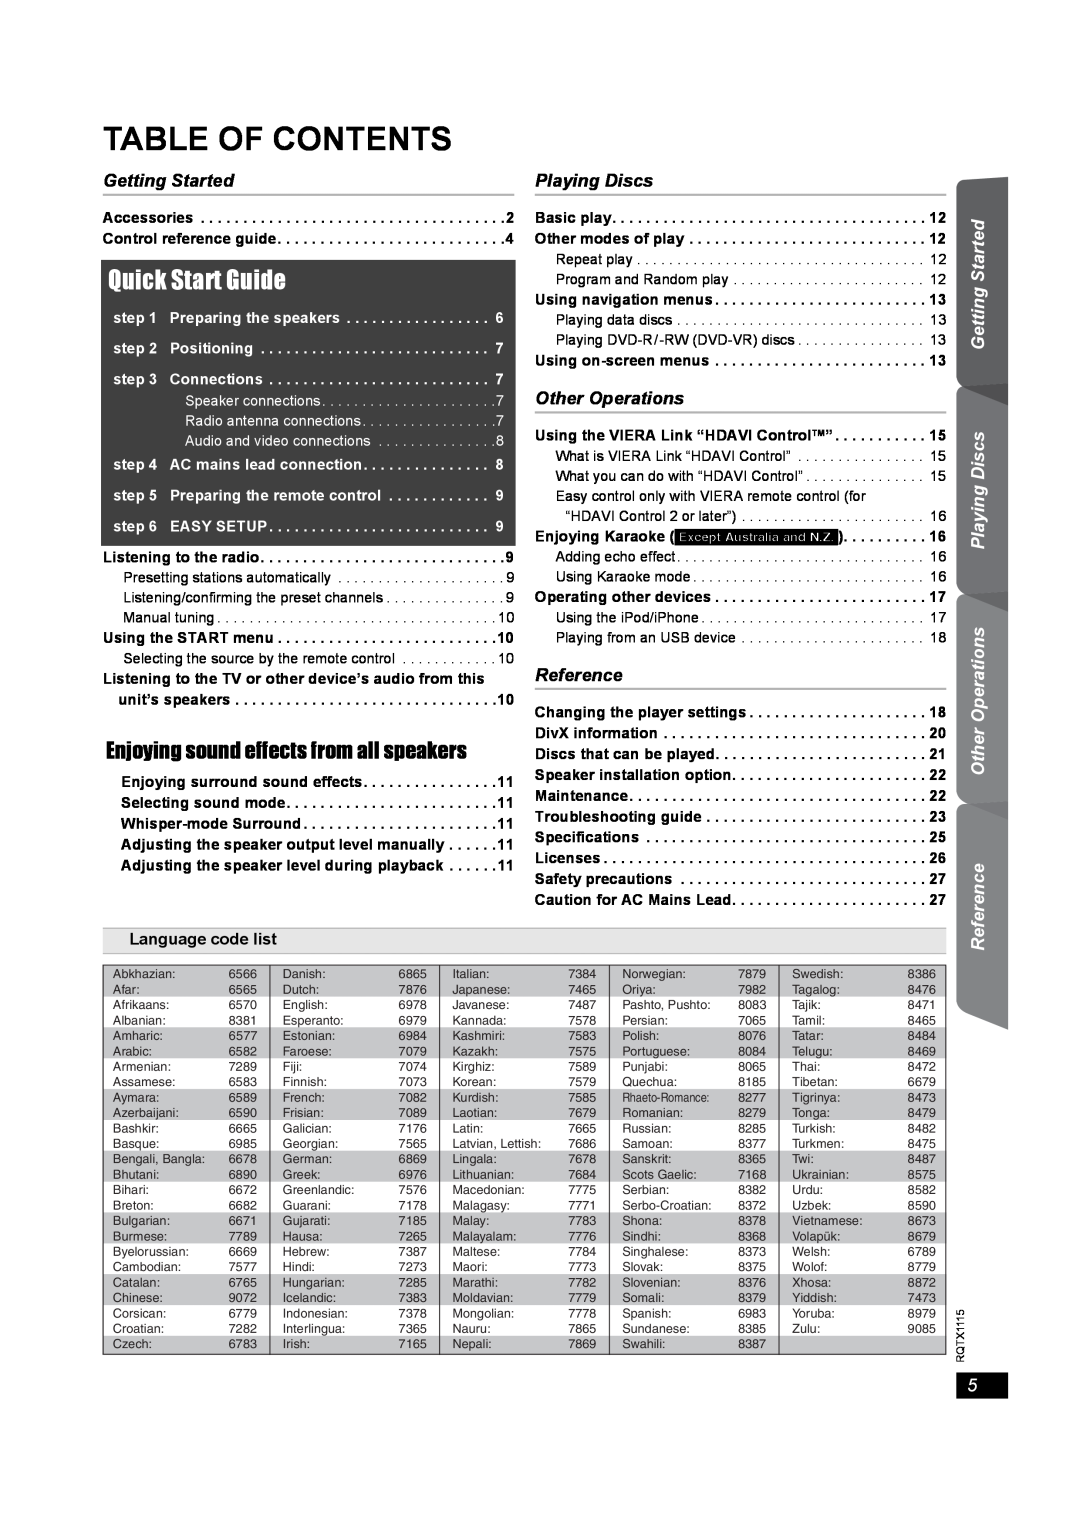 Panasonic SC-PT980 manual Table Of Contents, Getting Started Playing Discs Other Operations, Reference, Language code list 